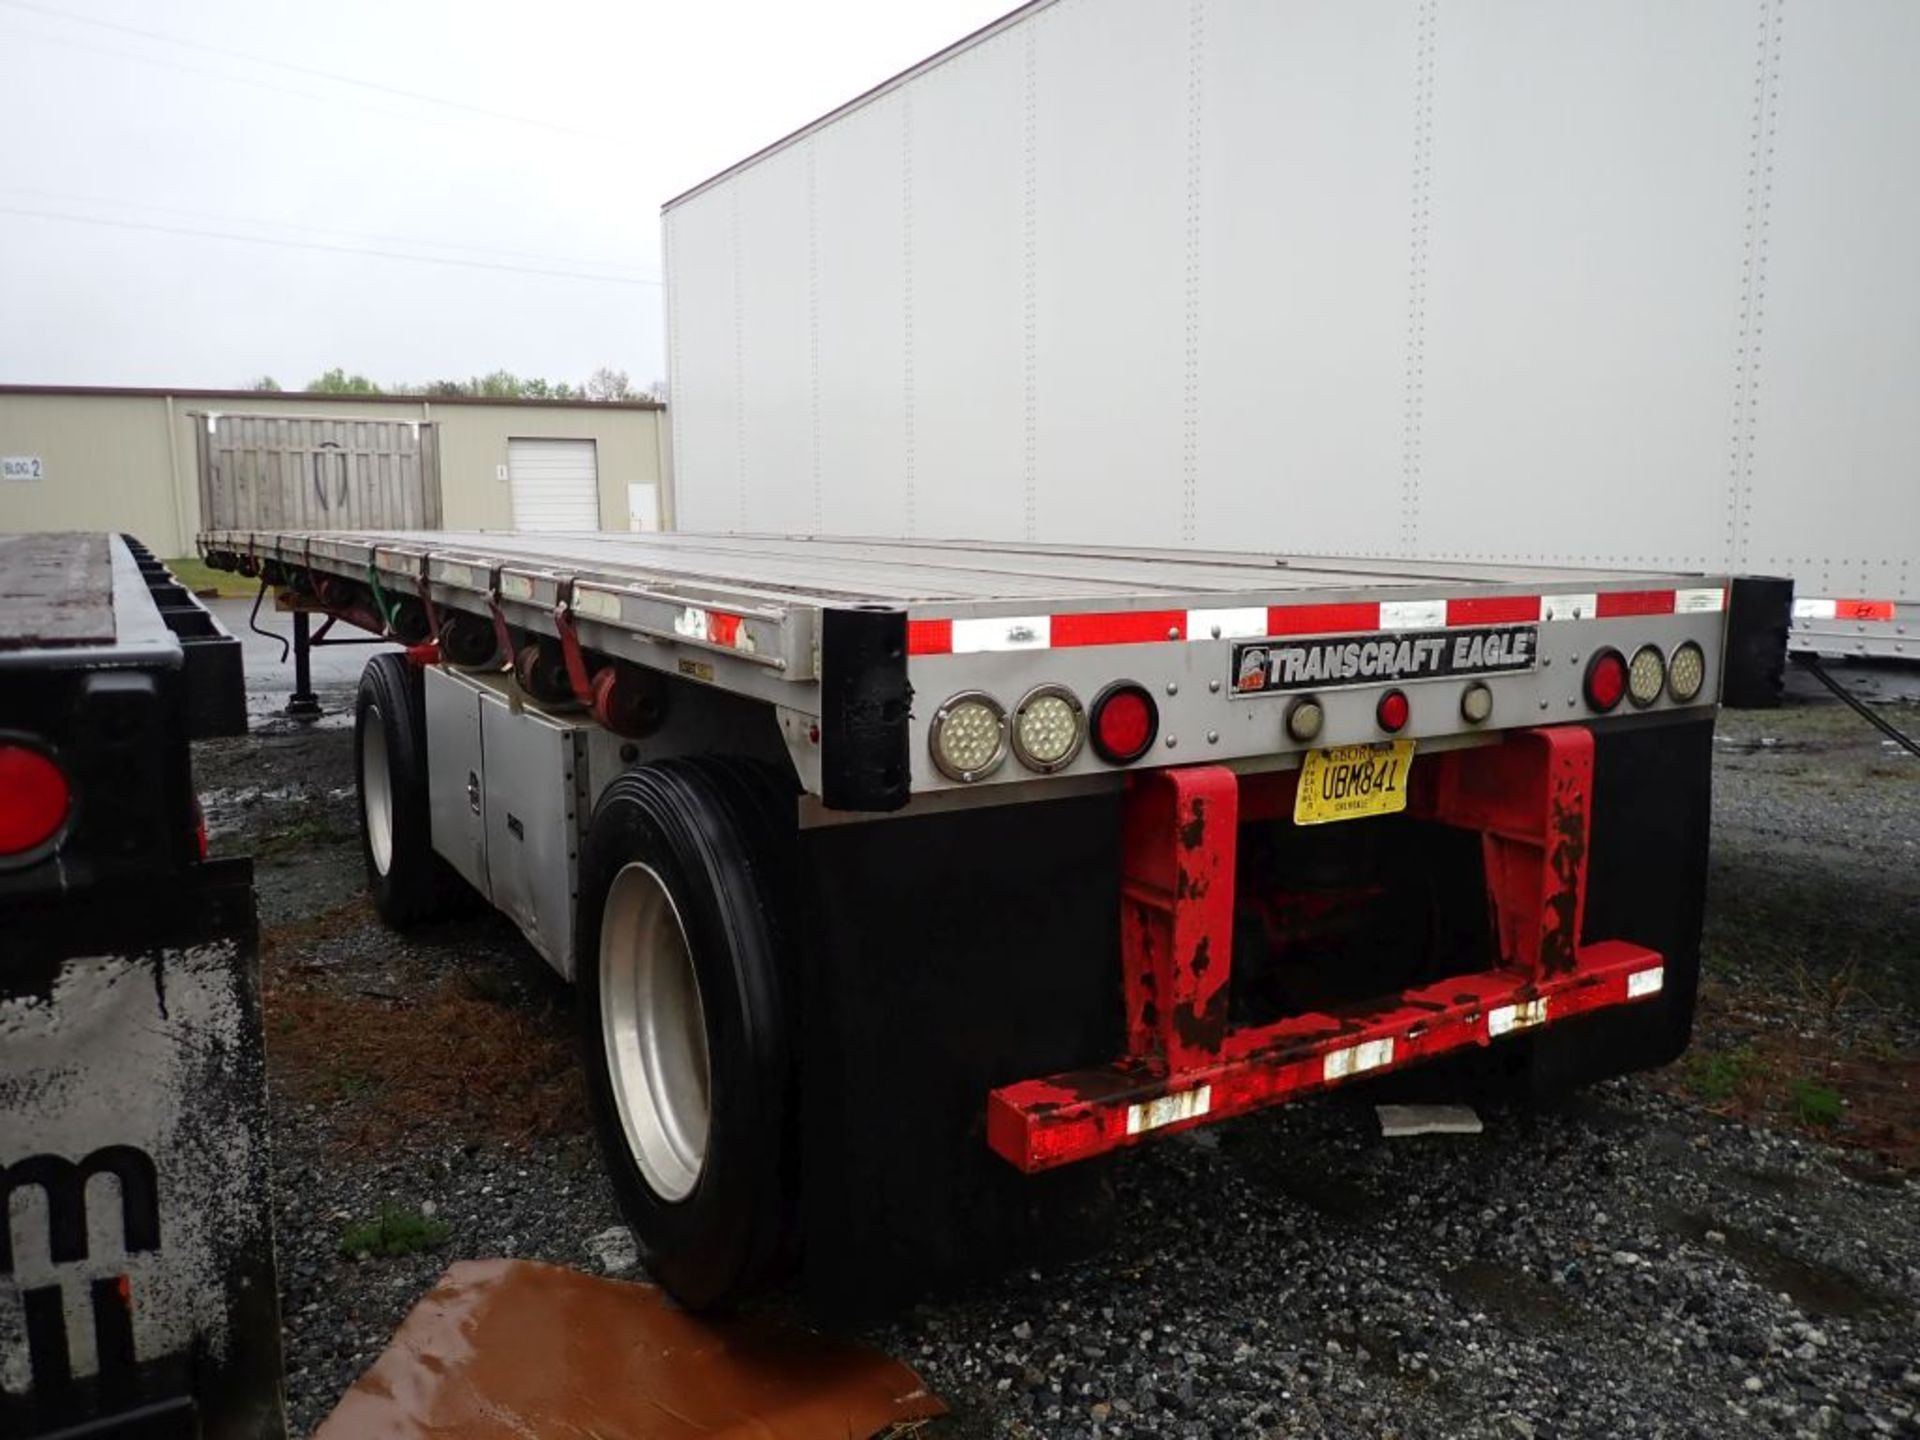 1998 Transcraft 48' Flatbed Trailer - Located in Spartanburg, SC - Image 6 of 17